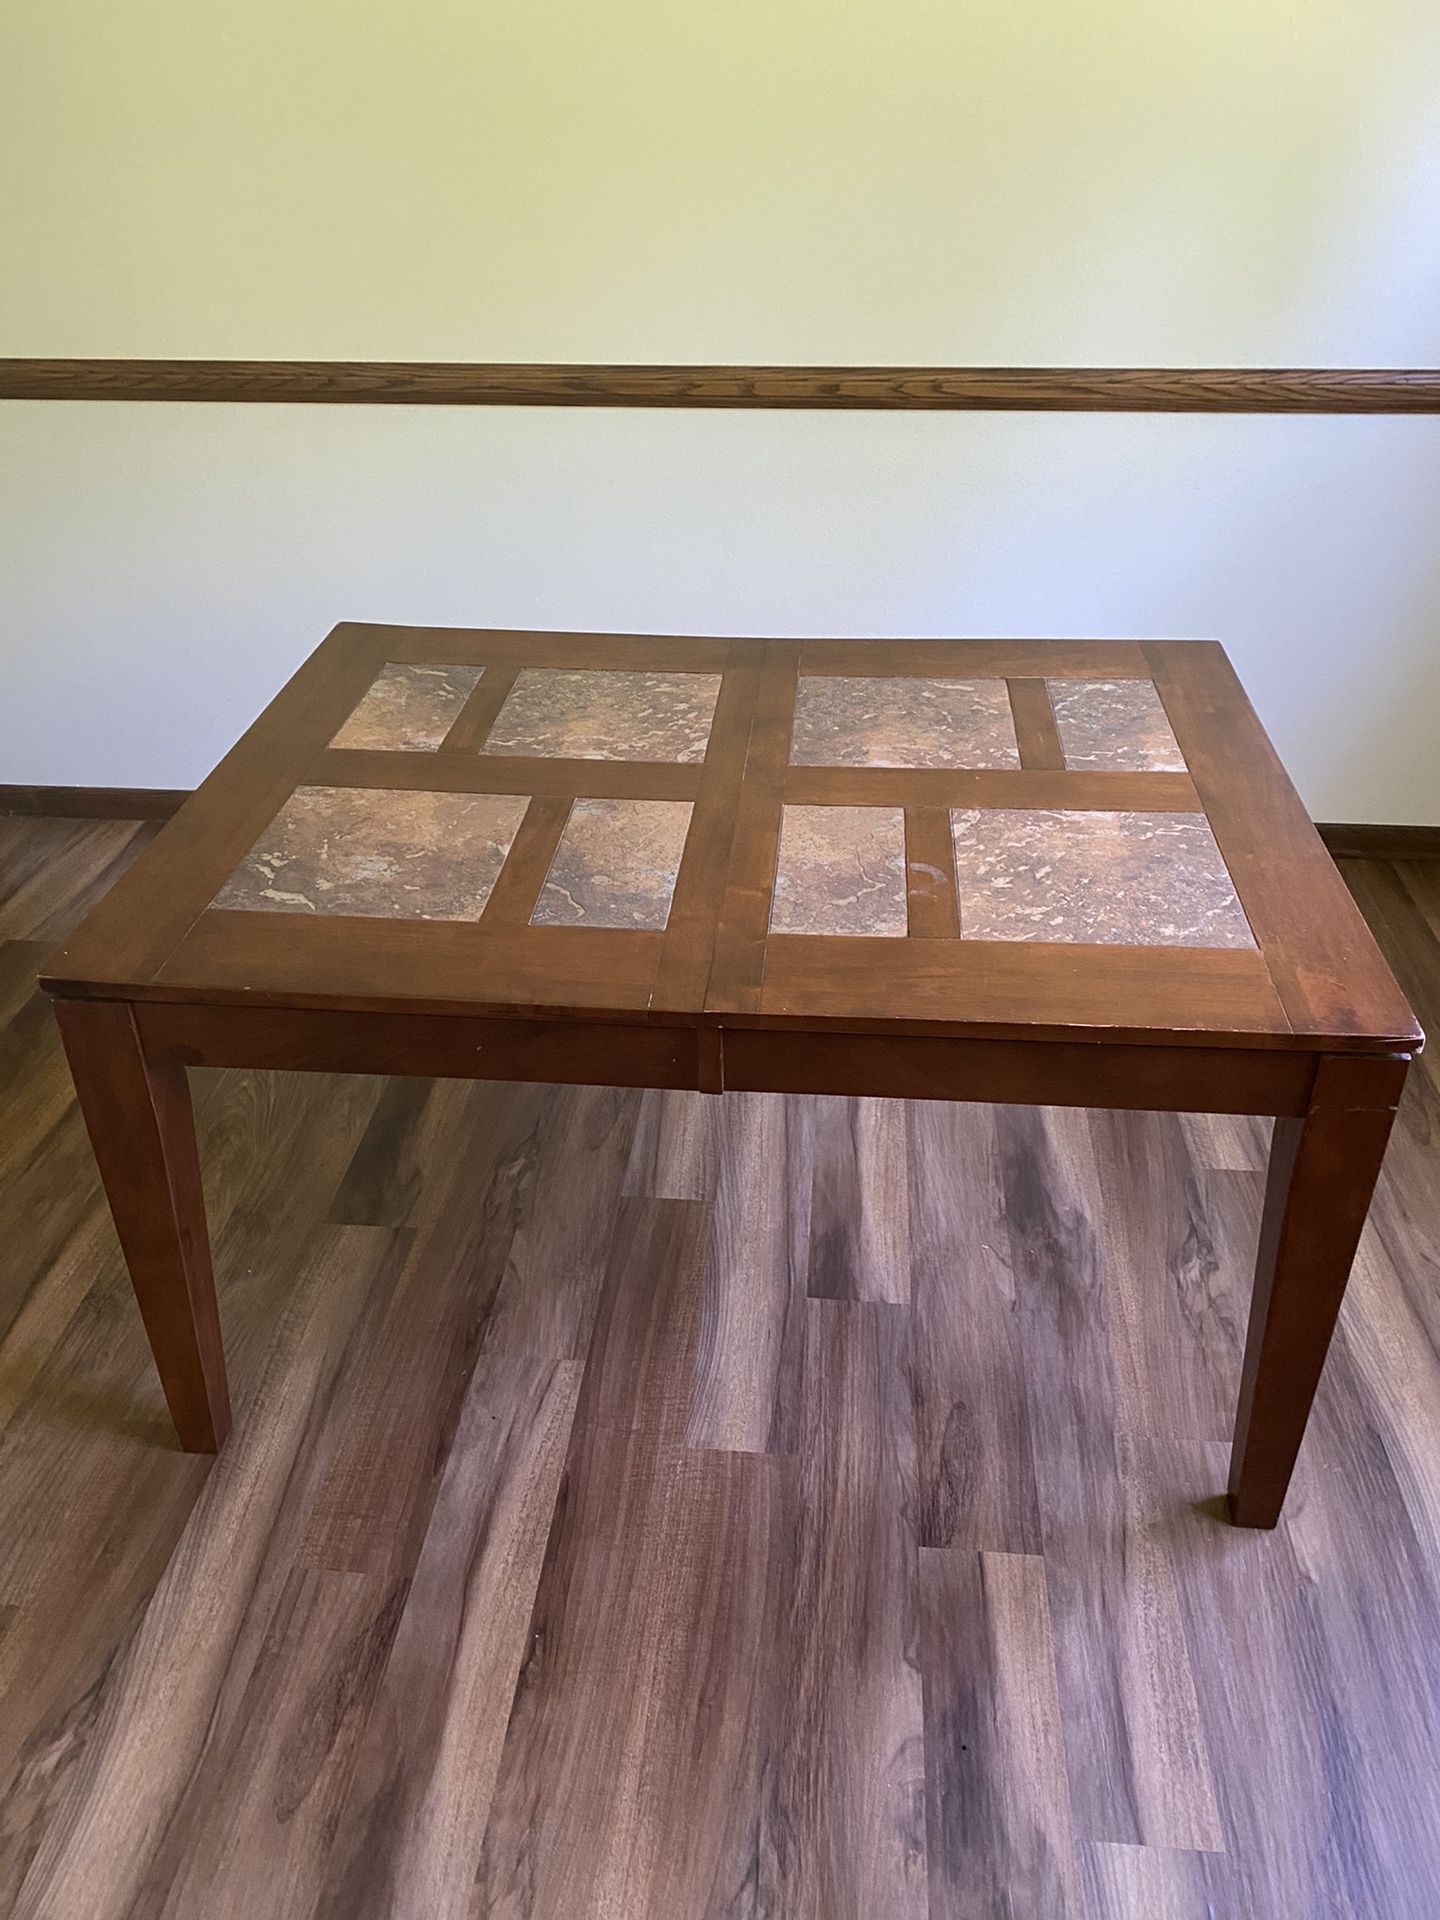 Tile Topped Dining Table With Extender (6-8 ppl)